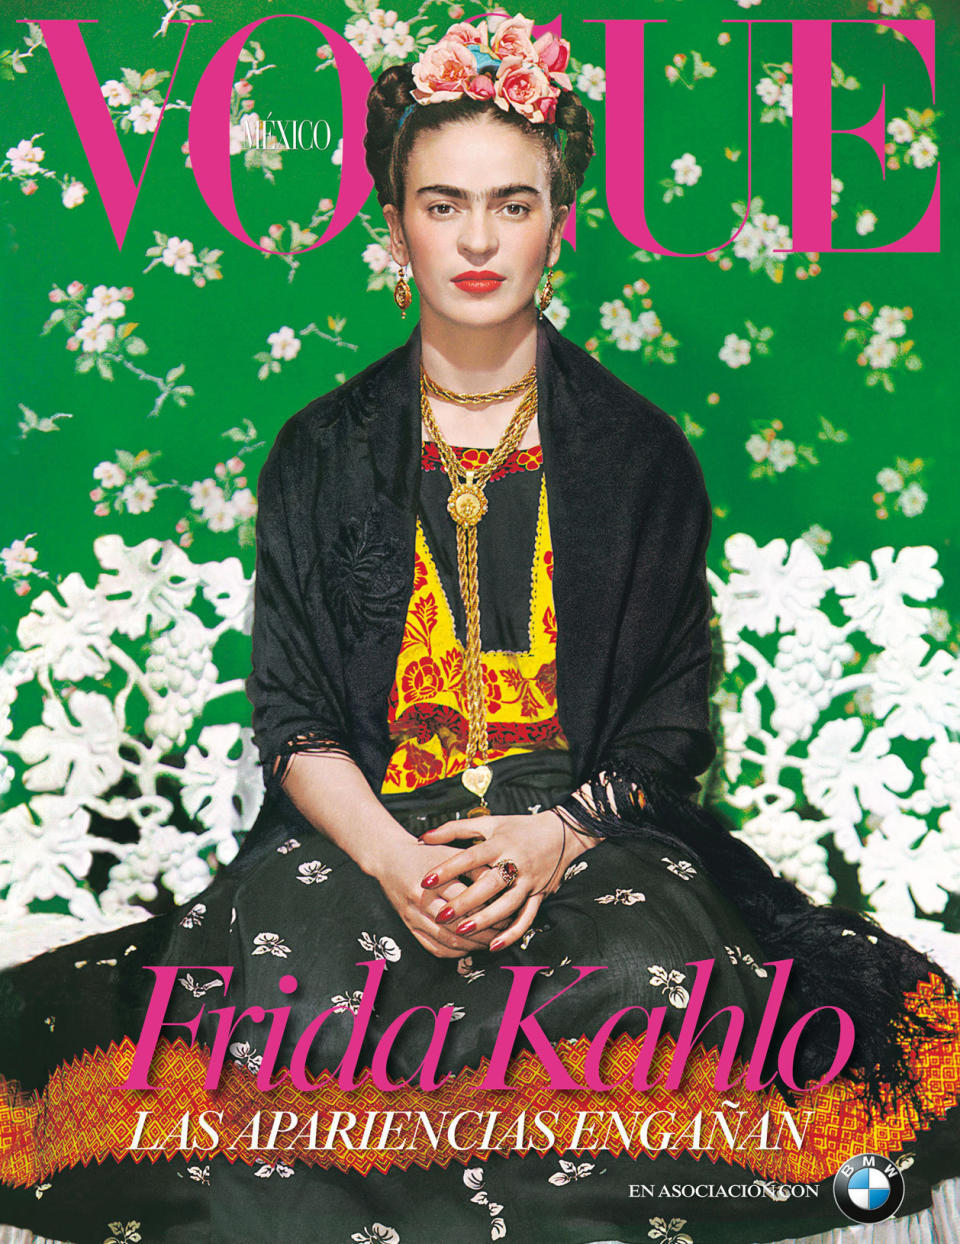 Frieda Kahlo may have single-handedly made milkmaid braids cool, especially when paired with a flower crown. 